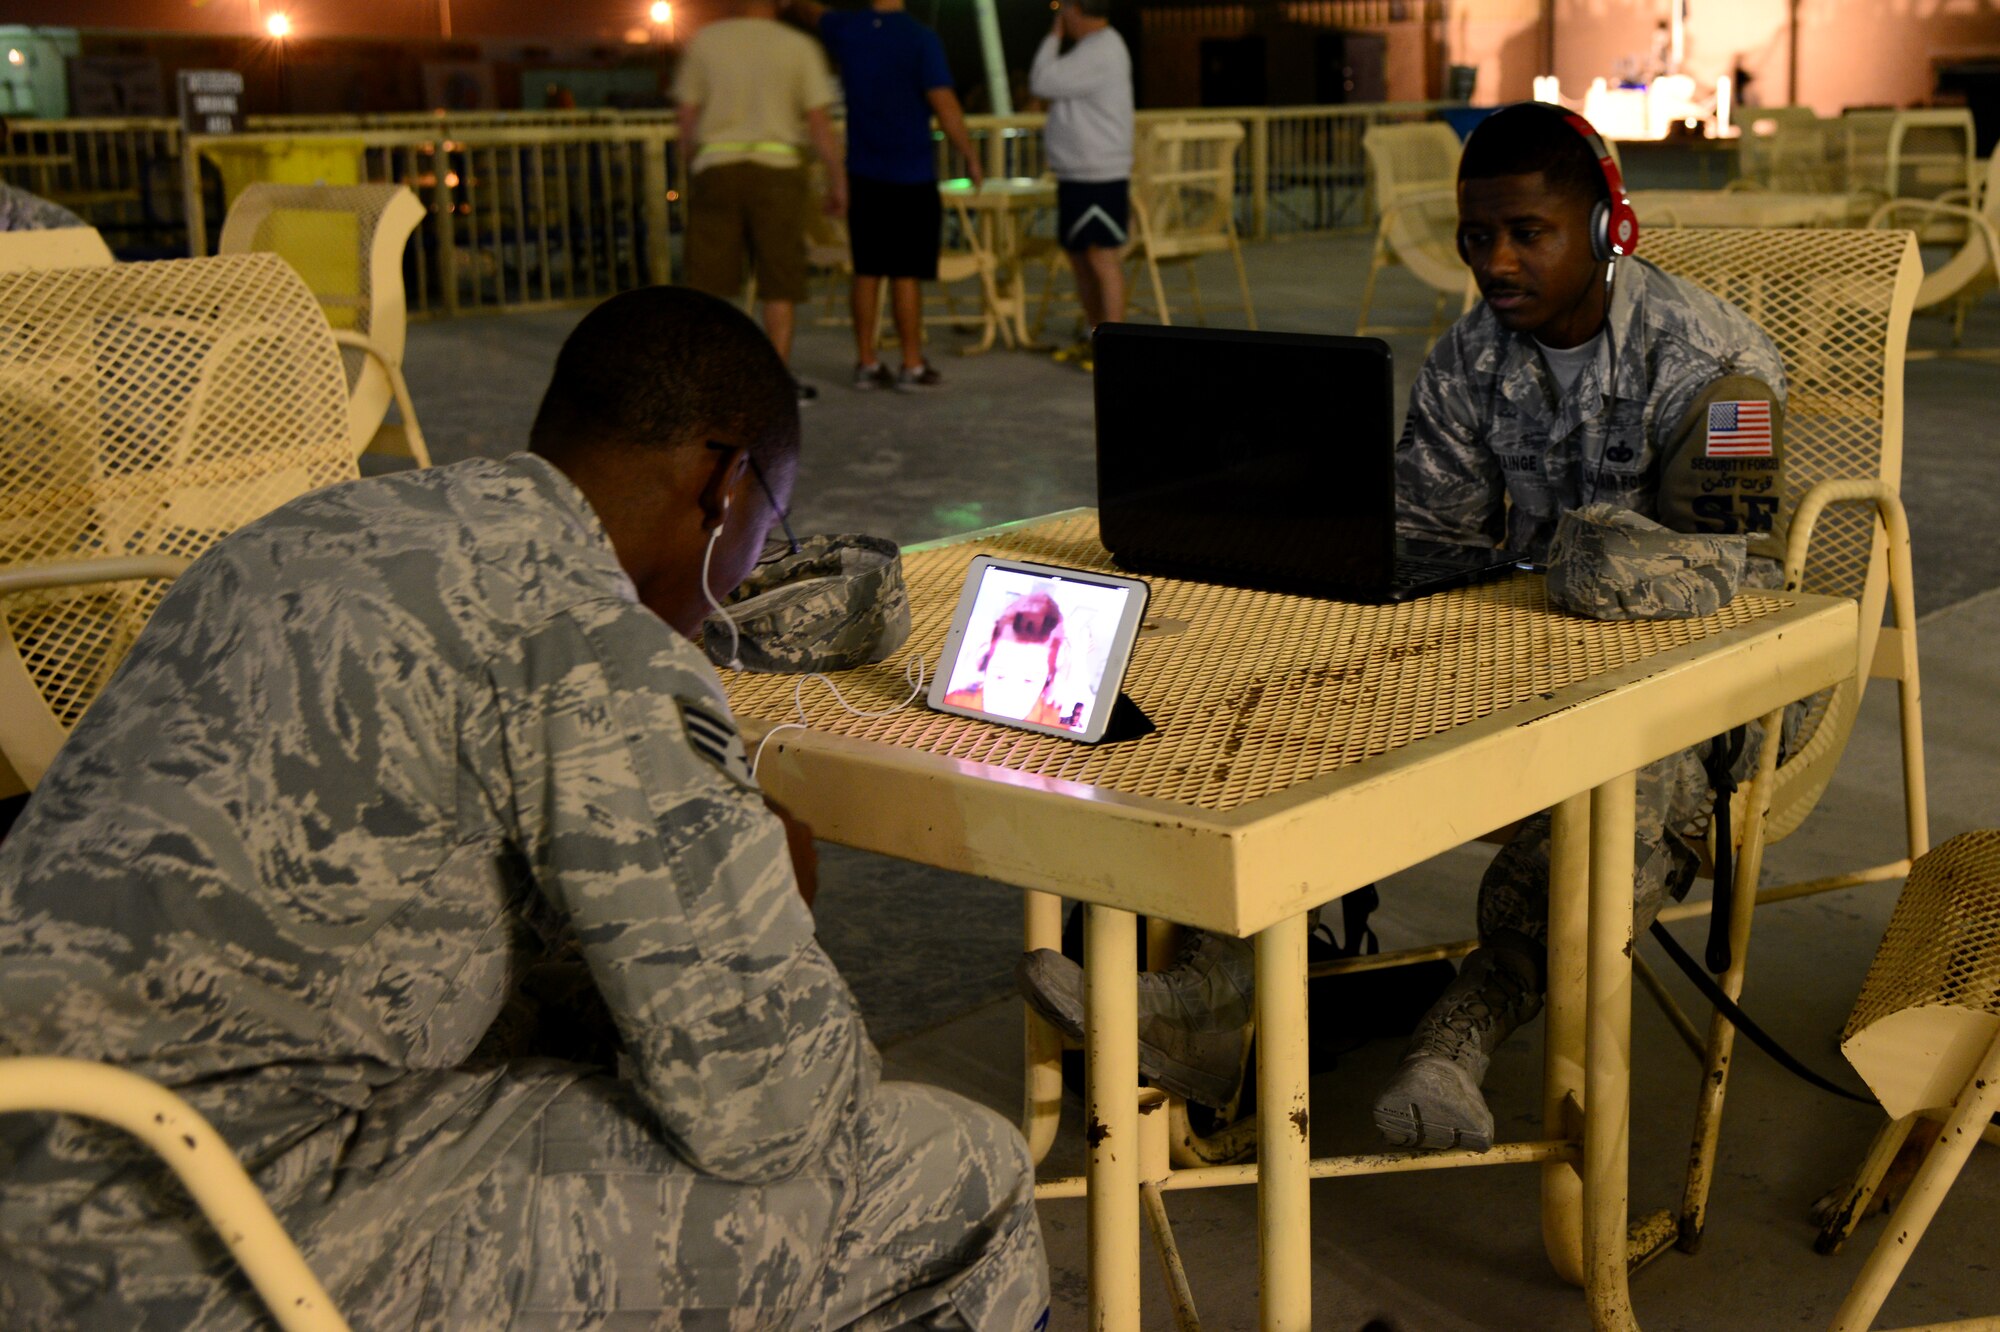 U.S. Air Force Senior Airman Elbert Foreman, left, and Staff Sgt. Corey Rainge, both 379th Expeditionary Security Forces Squadron military working dog handlers, video-chats with fifth-graders during the “Holler at a Hero” project Nov. 13, 2014, at Al Udeid Air Base, Qatar. The “Holler at a Hero” project was held in recognition of Veteran’s Day by a Security Forces veteran named James Wilson, who is now a teacher in New Jersey. The project allowed Wilson’s fifth grade class to have face-to-face interaction, via online video-messaging, with deployed service members to discuss their job duties, day-to-day activities and any personal challenges military members face while deployed. (U.S. Air Force photo by Senior Airman Kia Atkins)